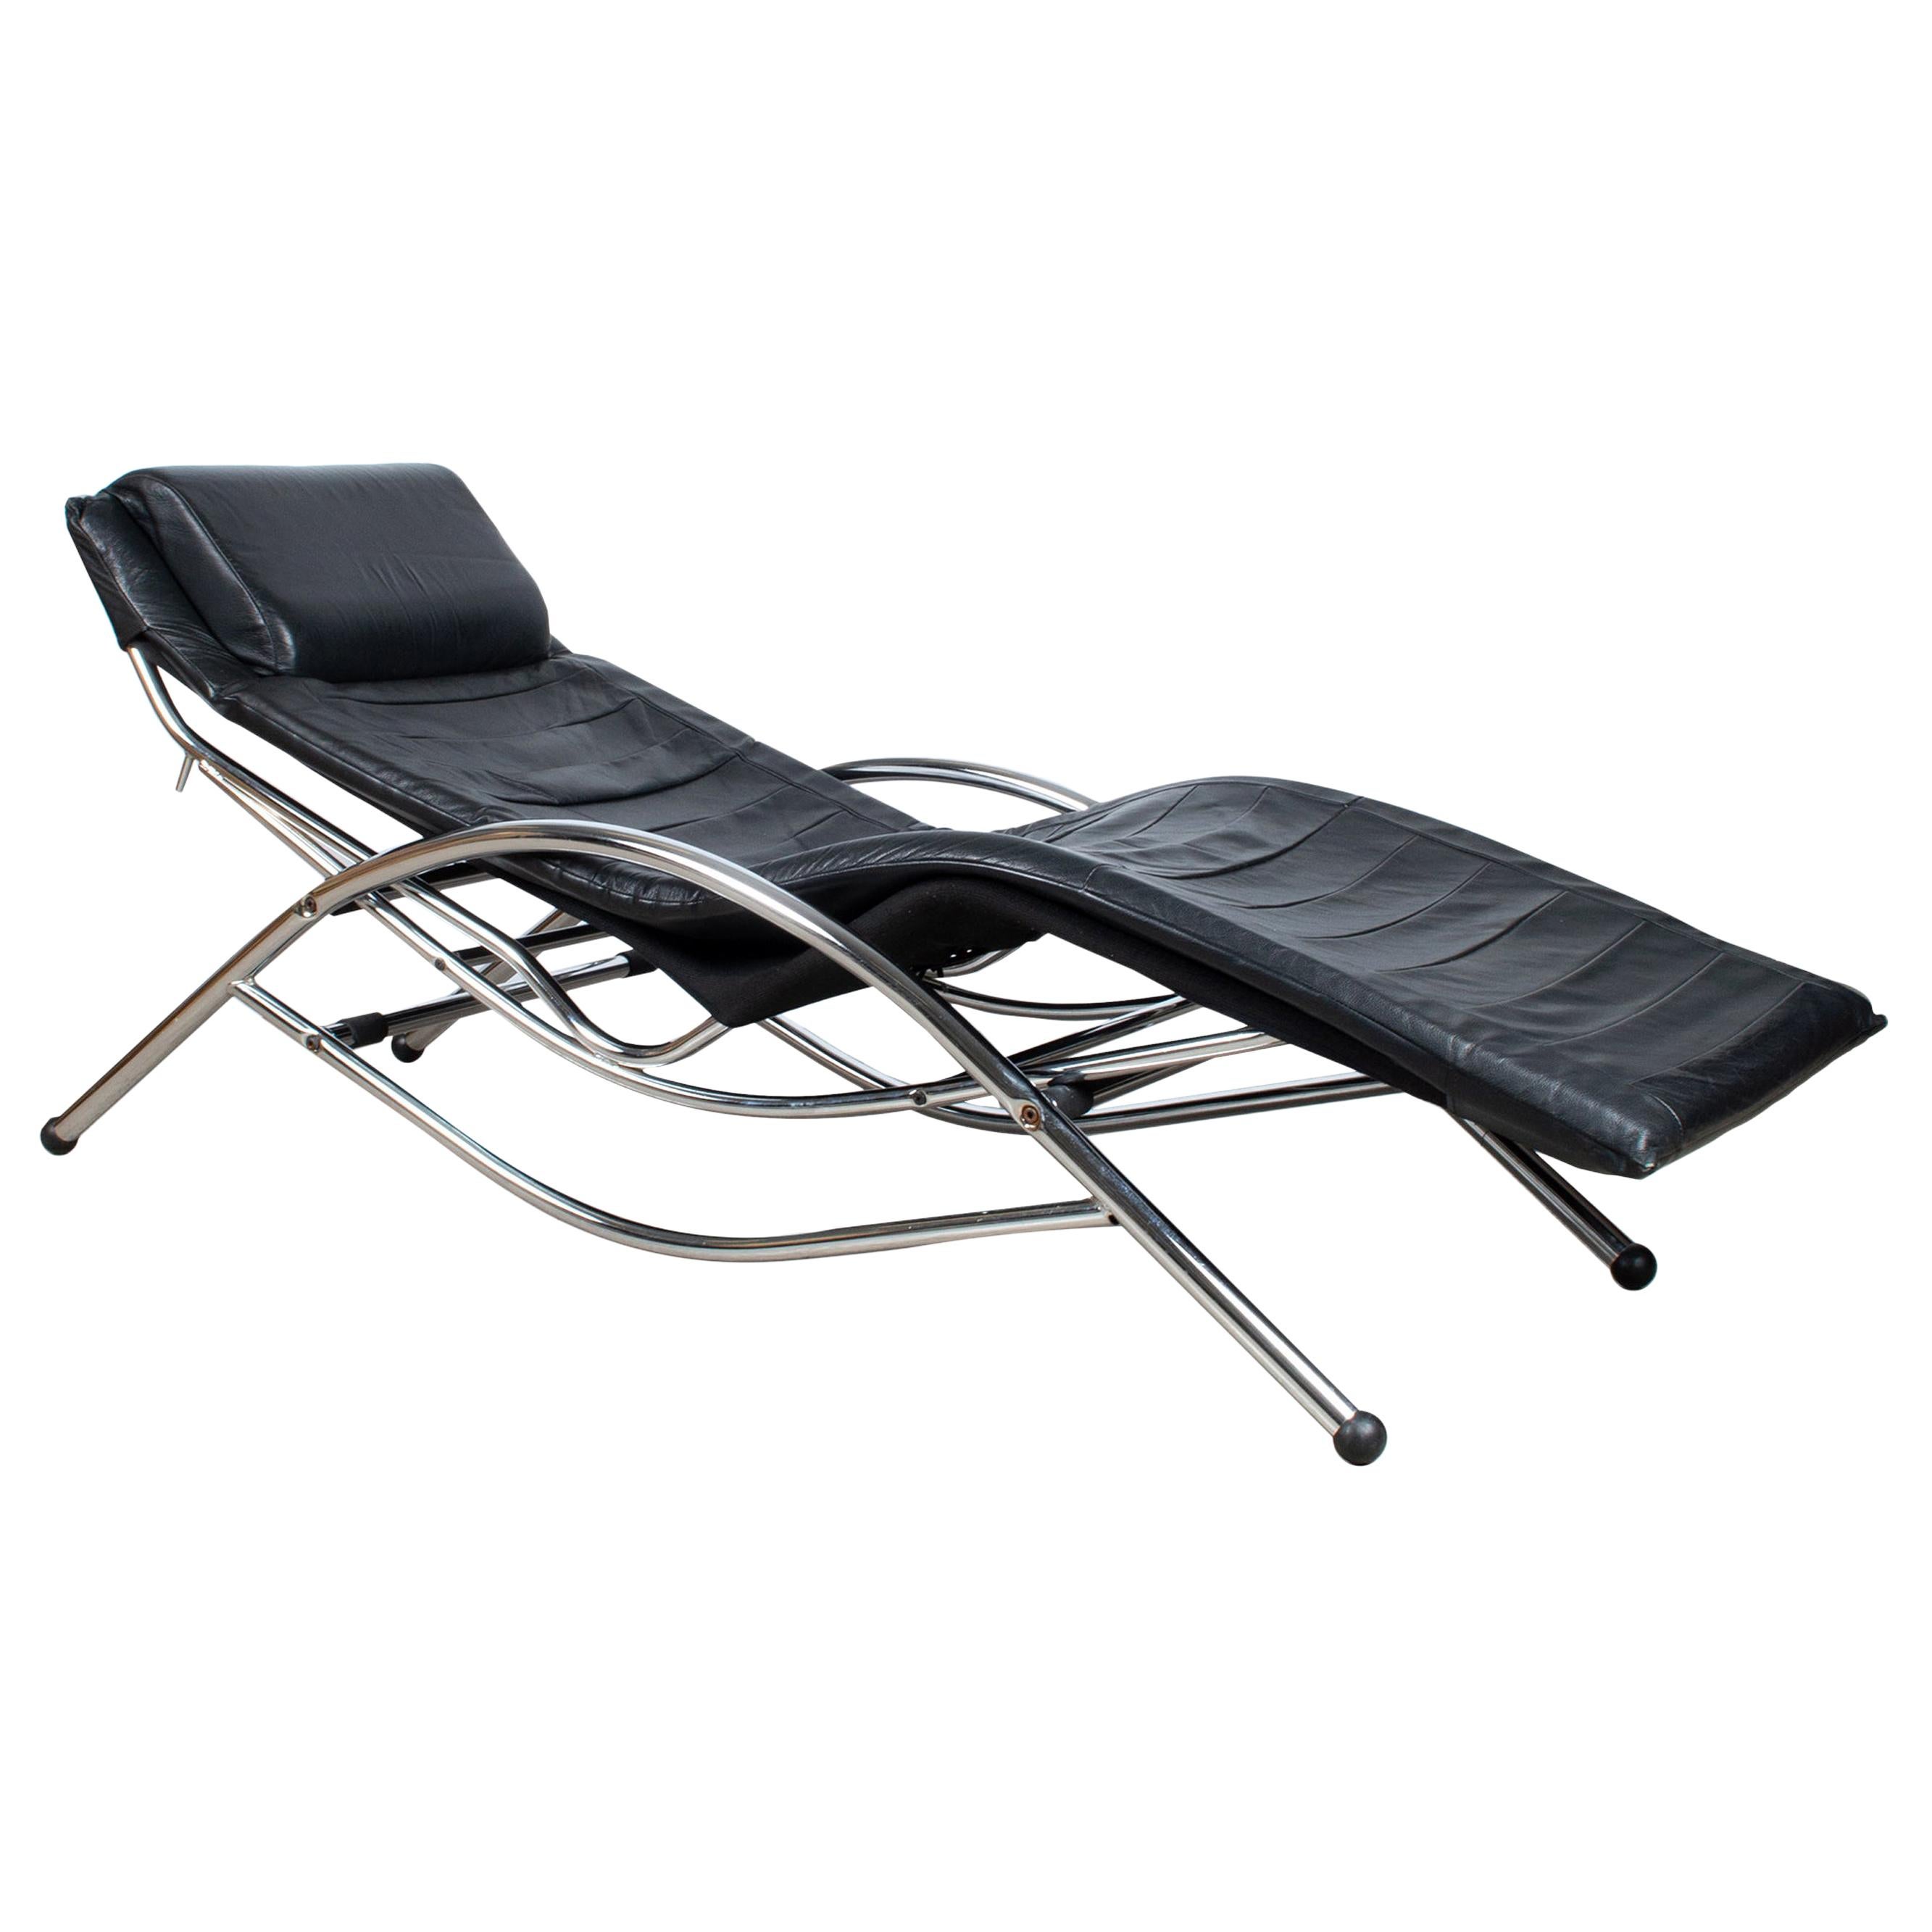 Mid-Century Modern Leather and Chrome Chaise Longue Daybed, Belgium, circa 1980